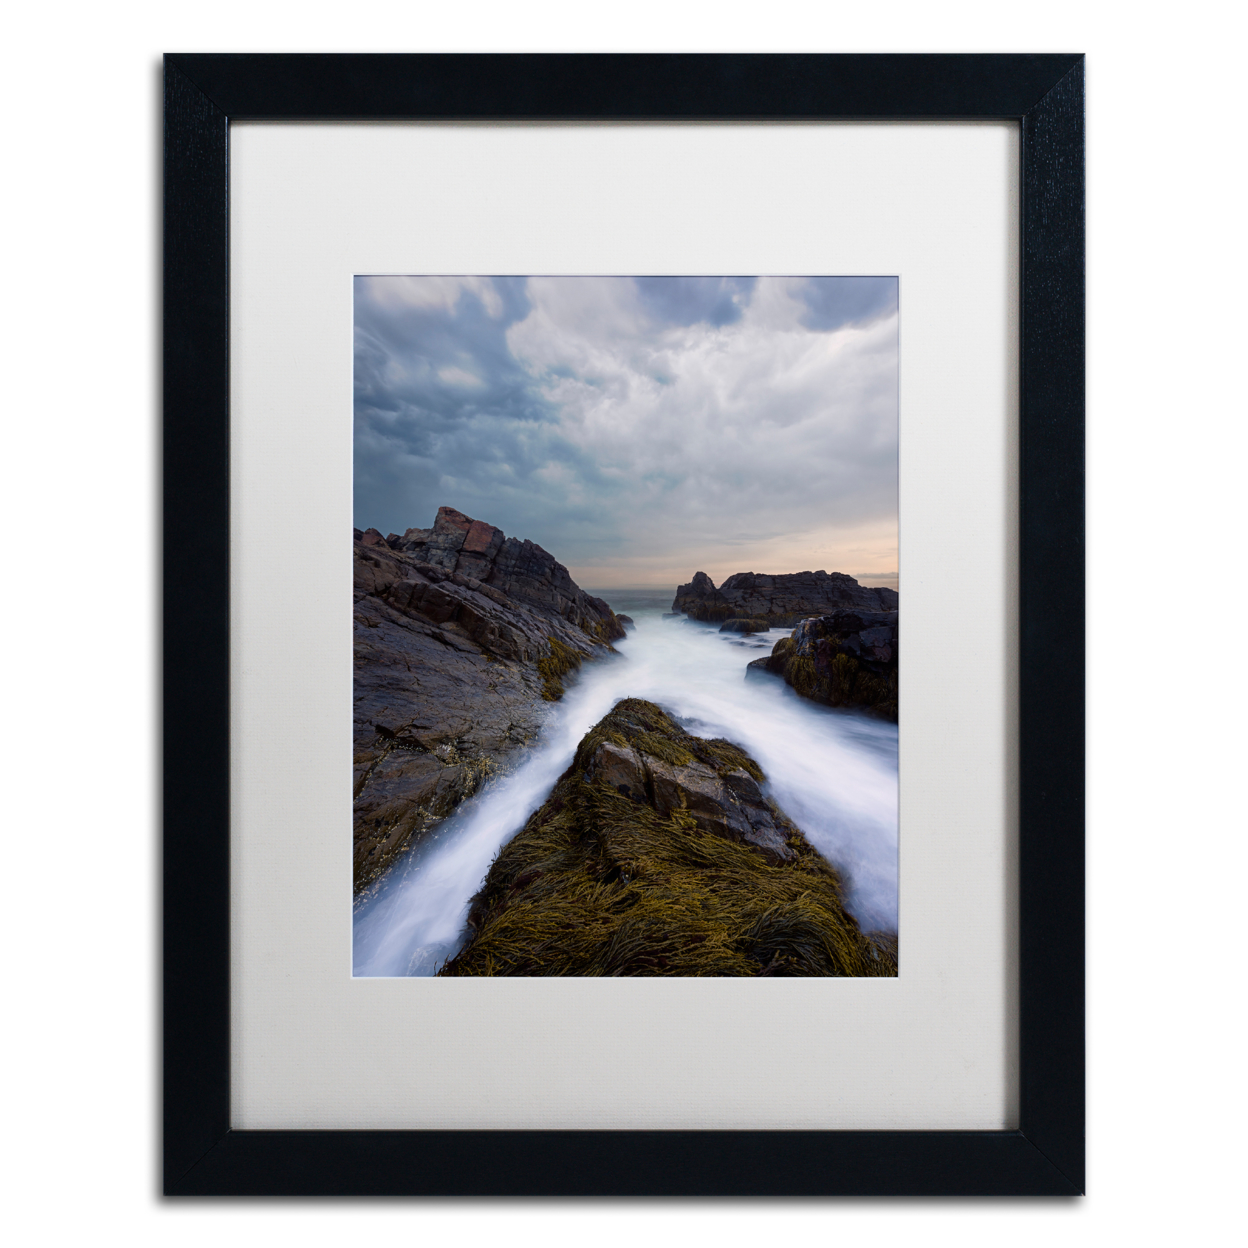 Michael Blanchette Photography 'On The Rocks' Black Wooden Framed Art 18 X 22 Inches